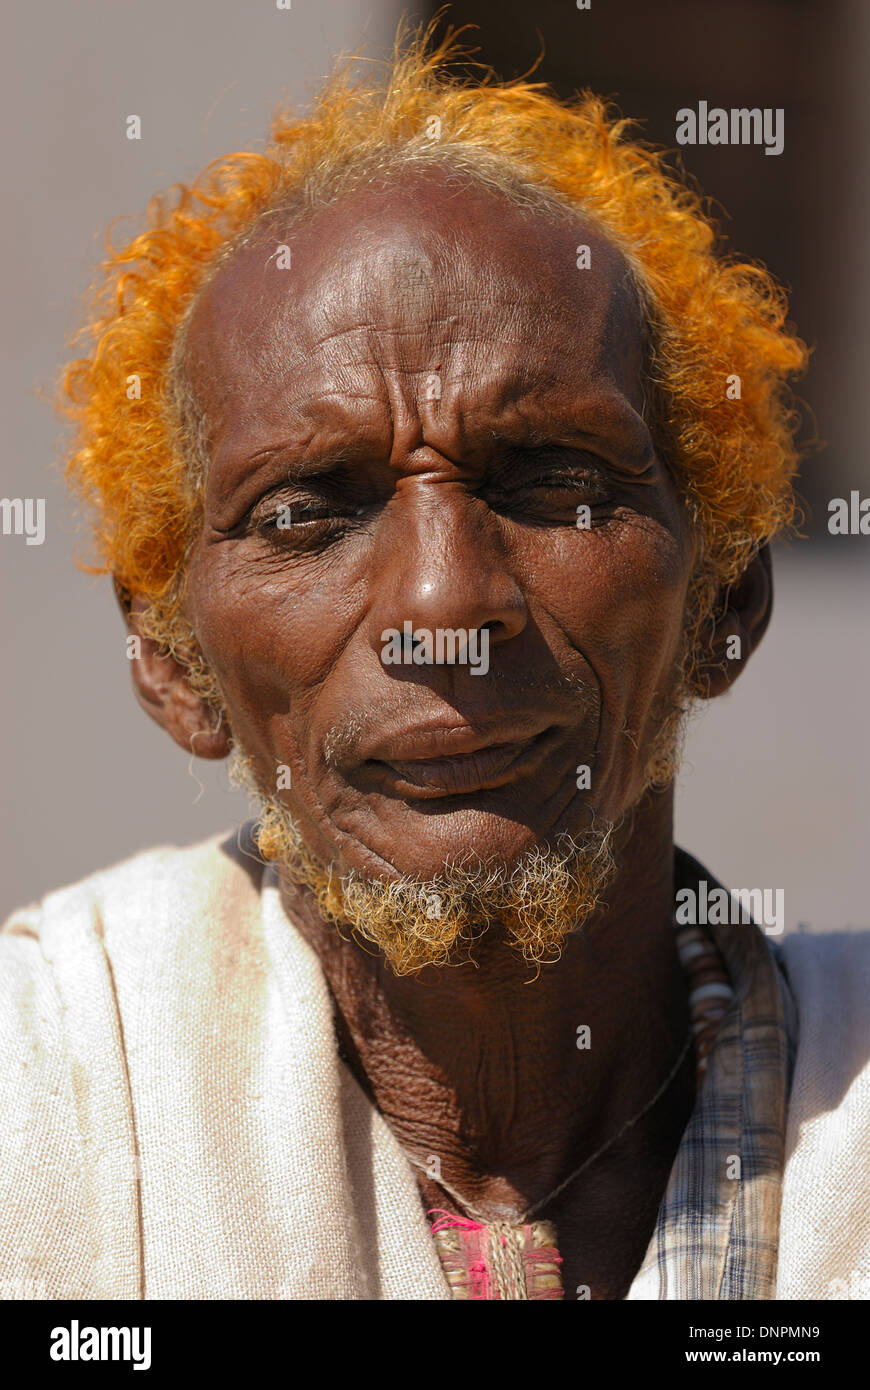 Issa man in Dikhil town in the south of Djibouti, Horn of Africa Stock Photo